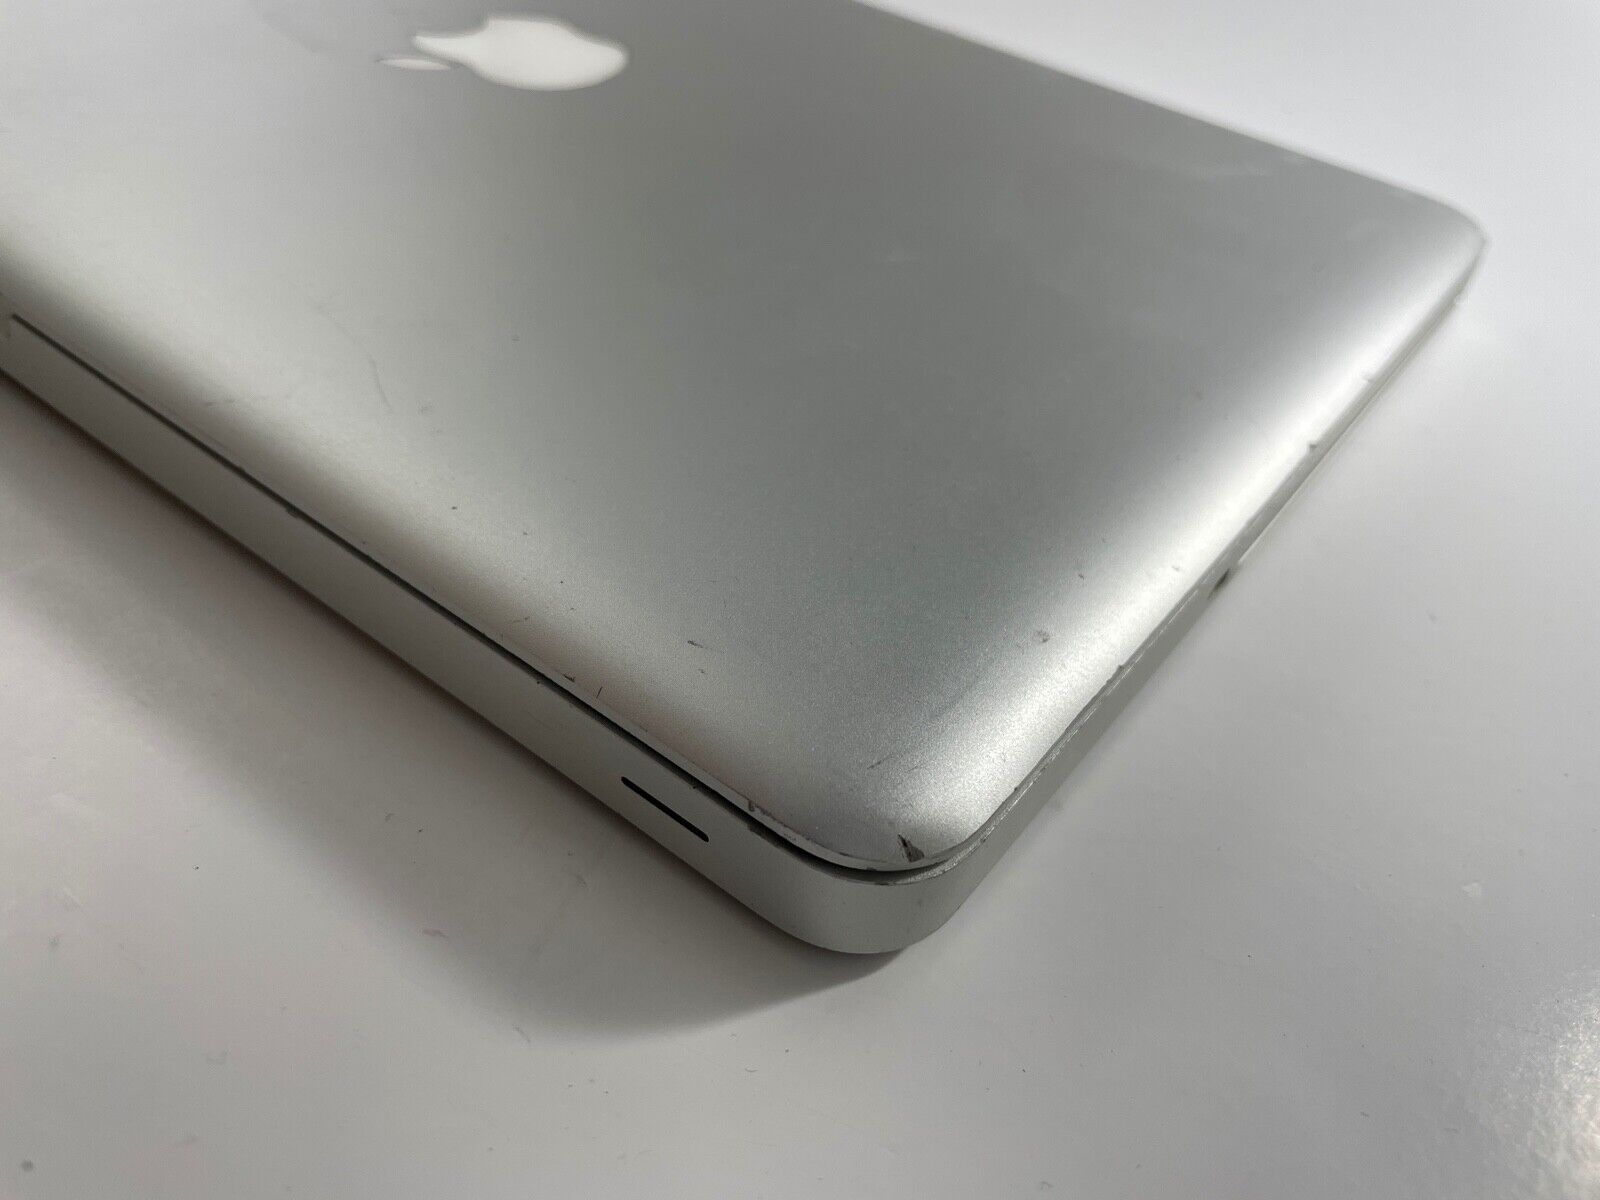 MacBook Pro 13" Mid 2012 works - 500 hdd included  - READ AD no logic board